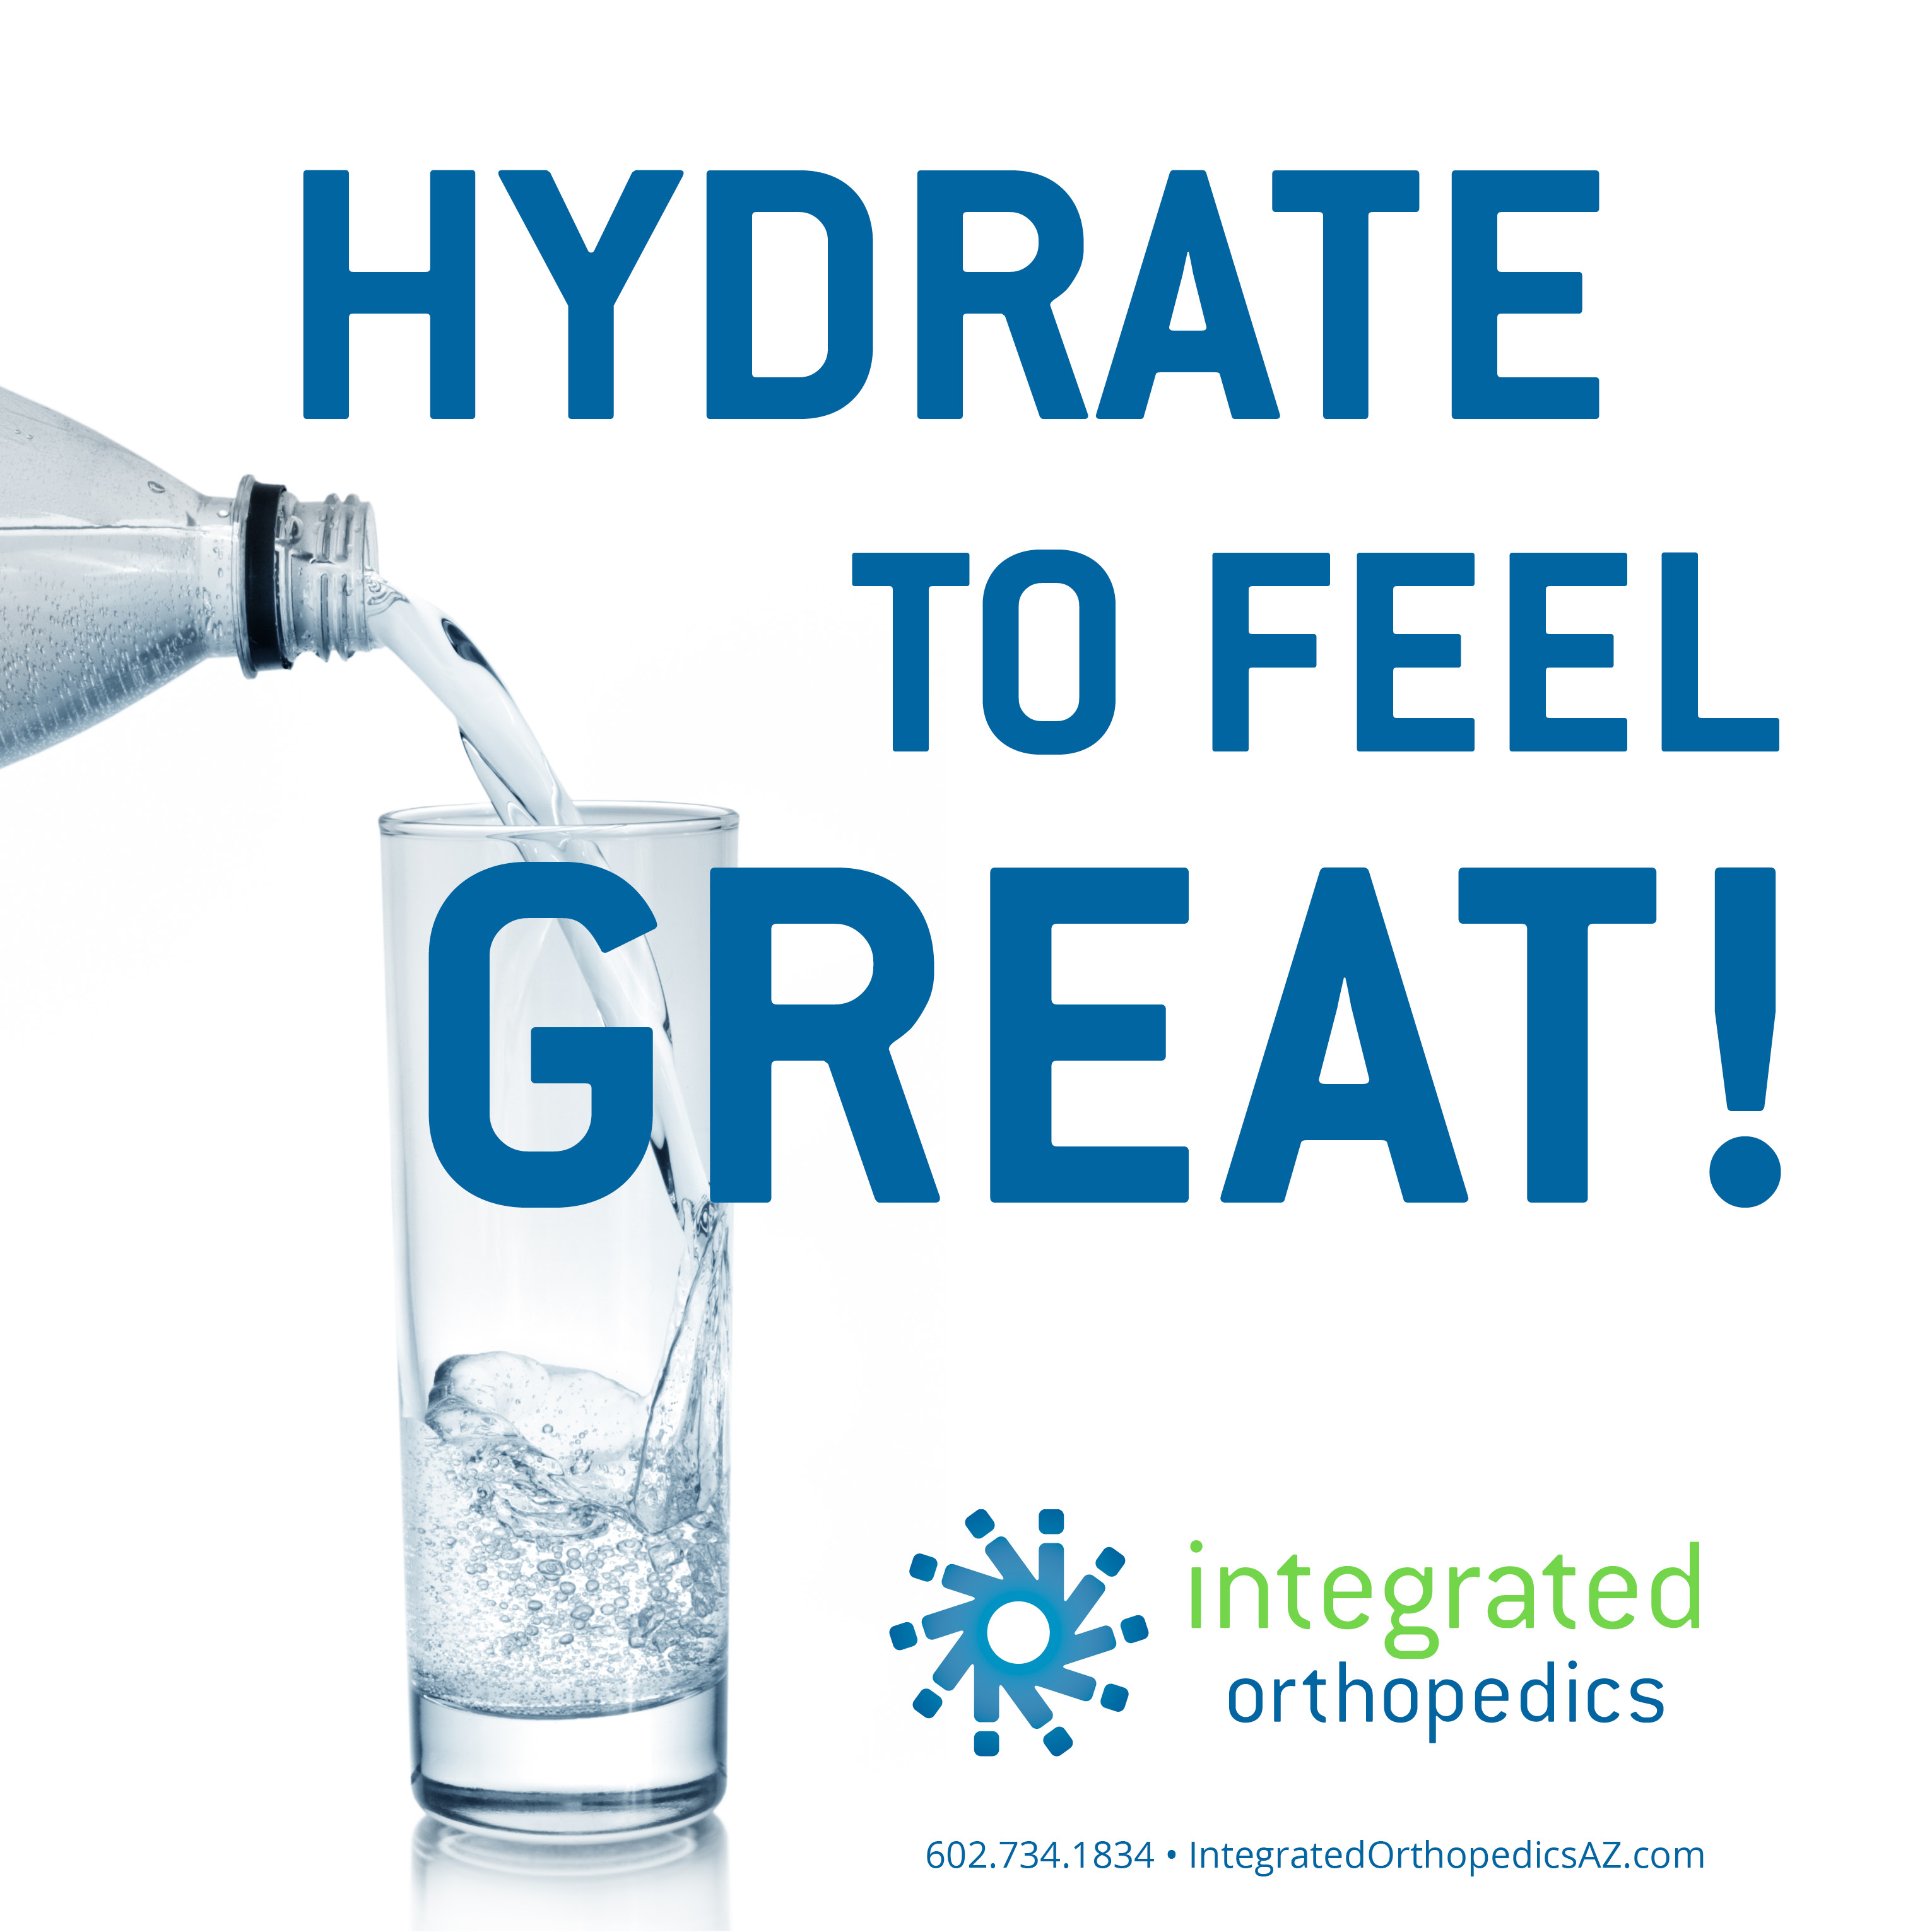 HYDRATE GREAT